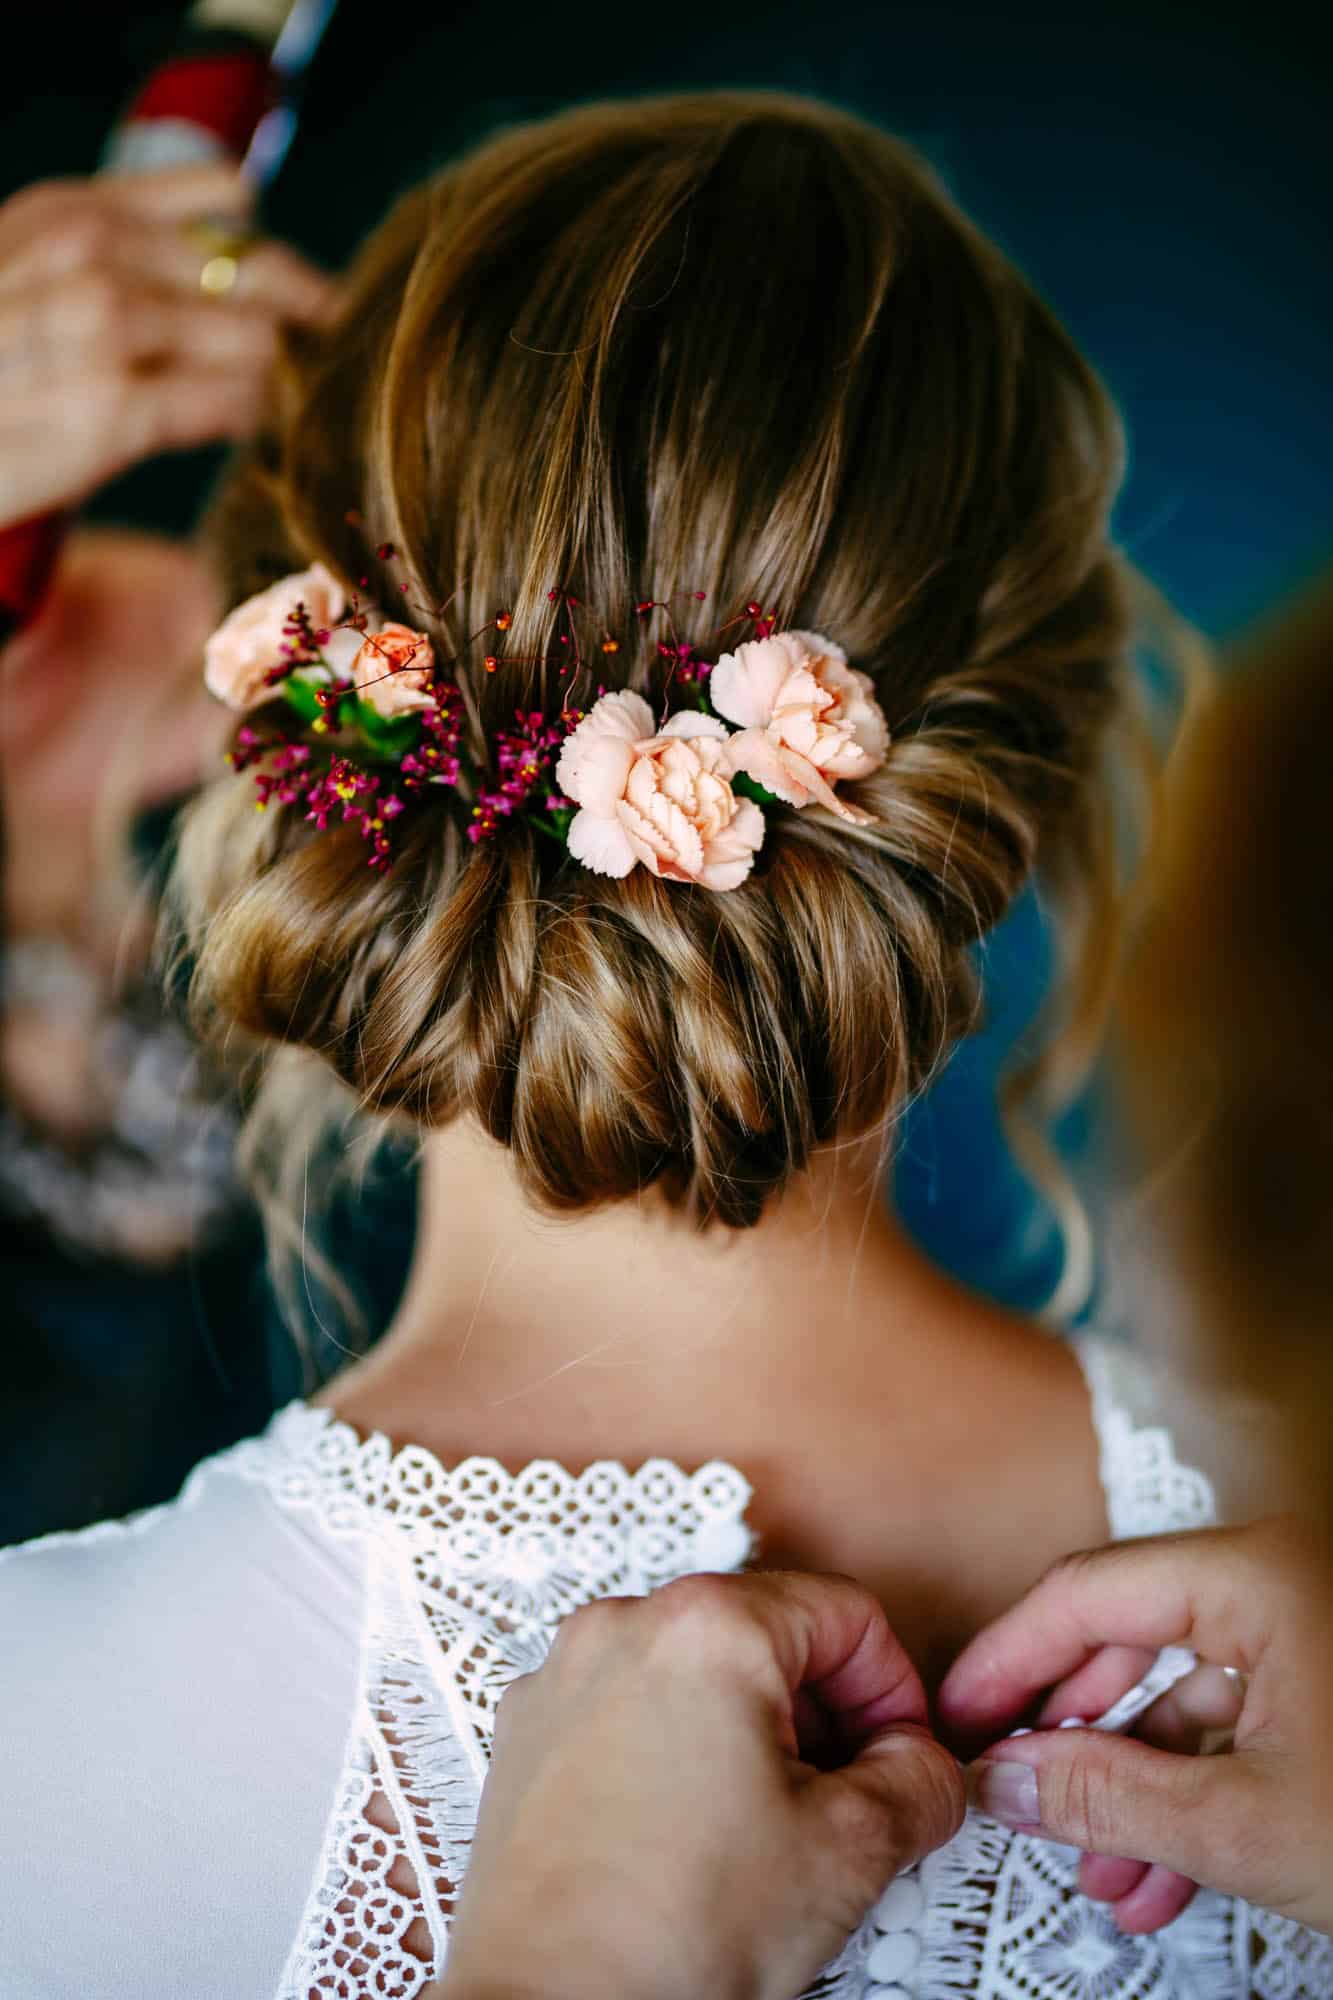 A bride having her hair done with bridal hairstyles and flowers in her hair.